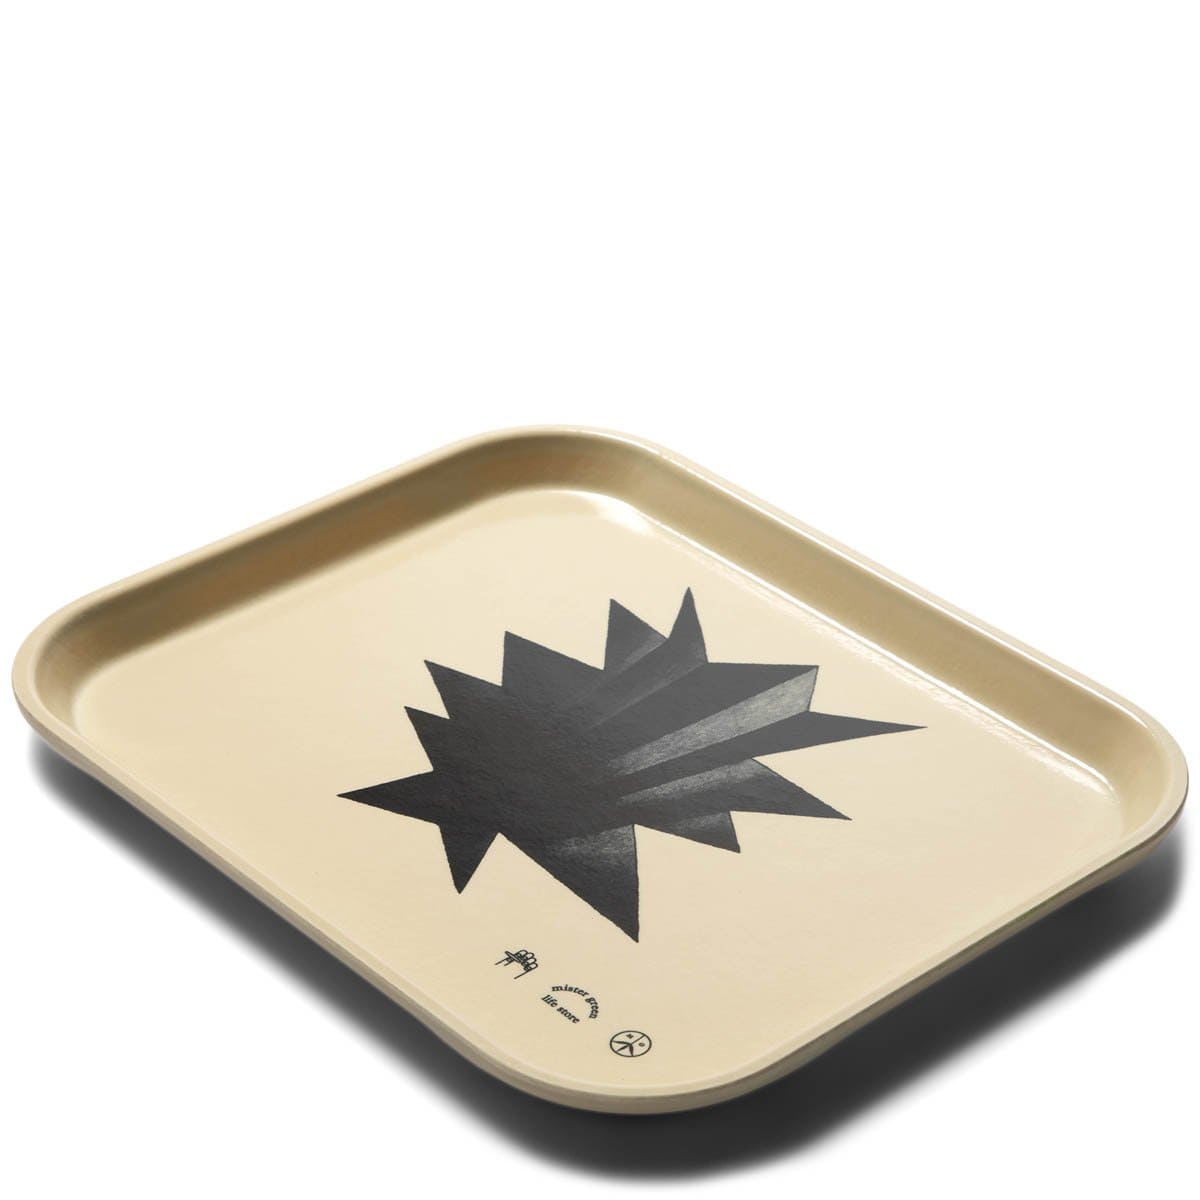 Mister Green Bags & Accessories EGGSHELL / 8 X 10 IN. ANAMORPHIC ROLLING TRAY